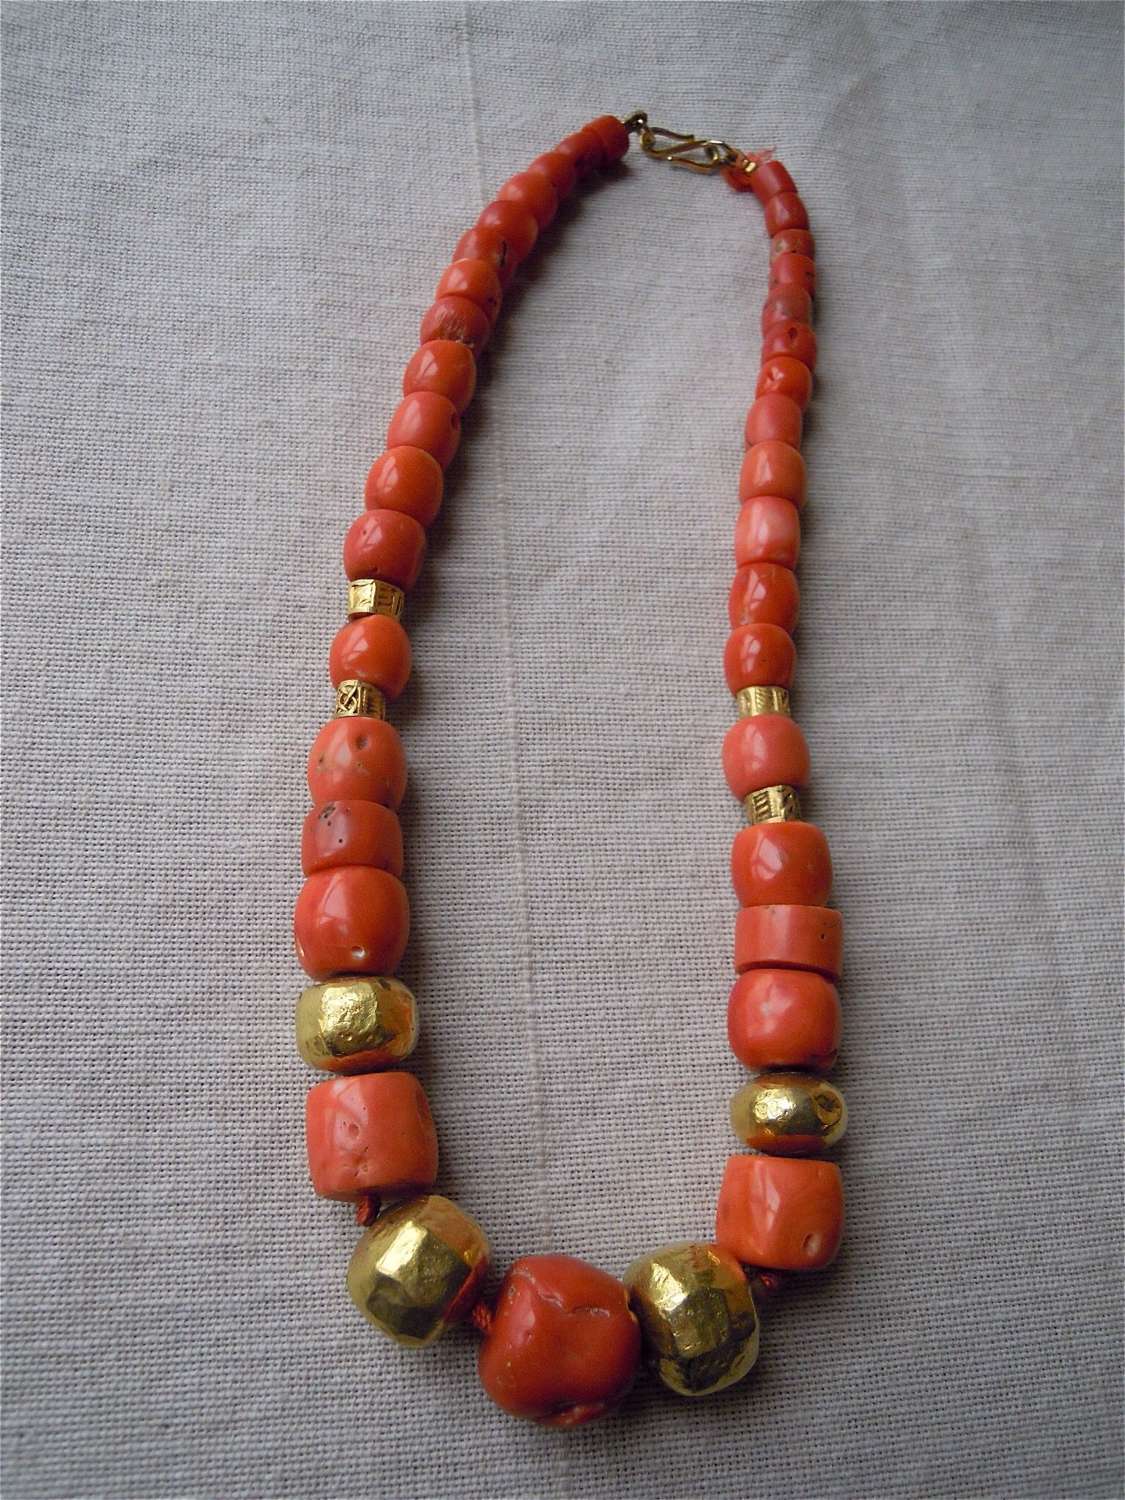 Antique coral and 22ct gold bead necklace